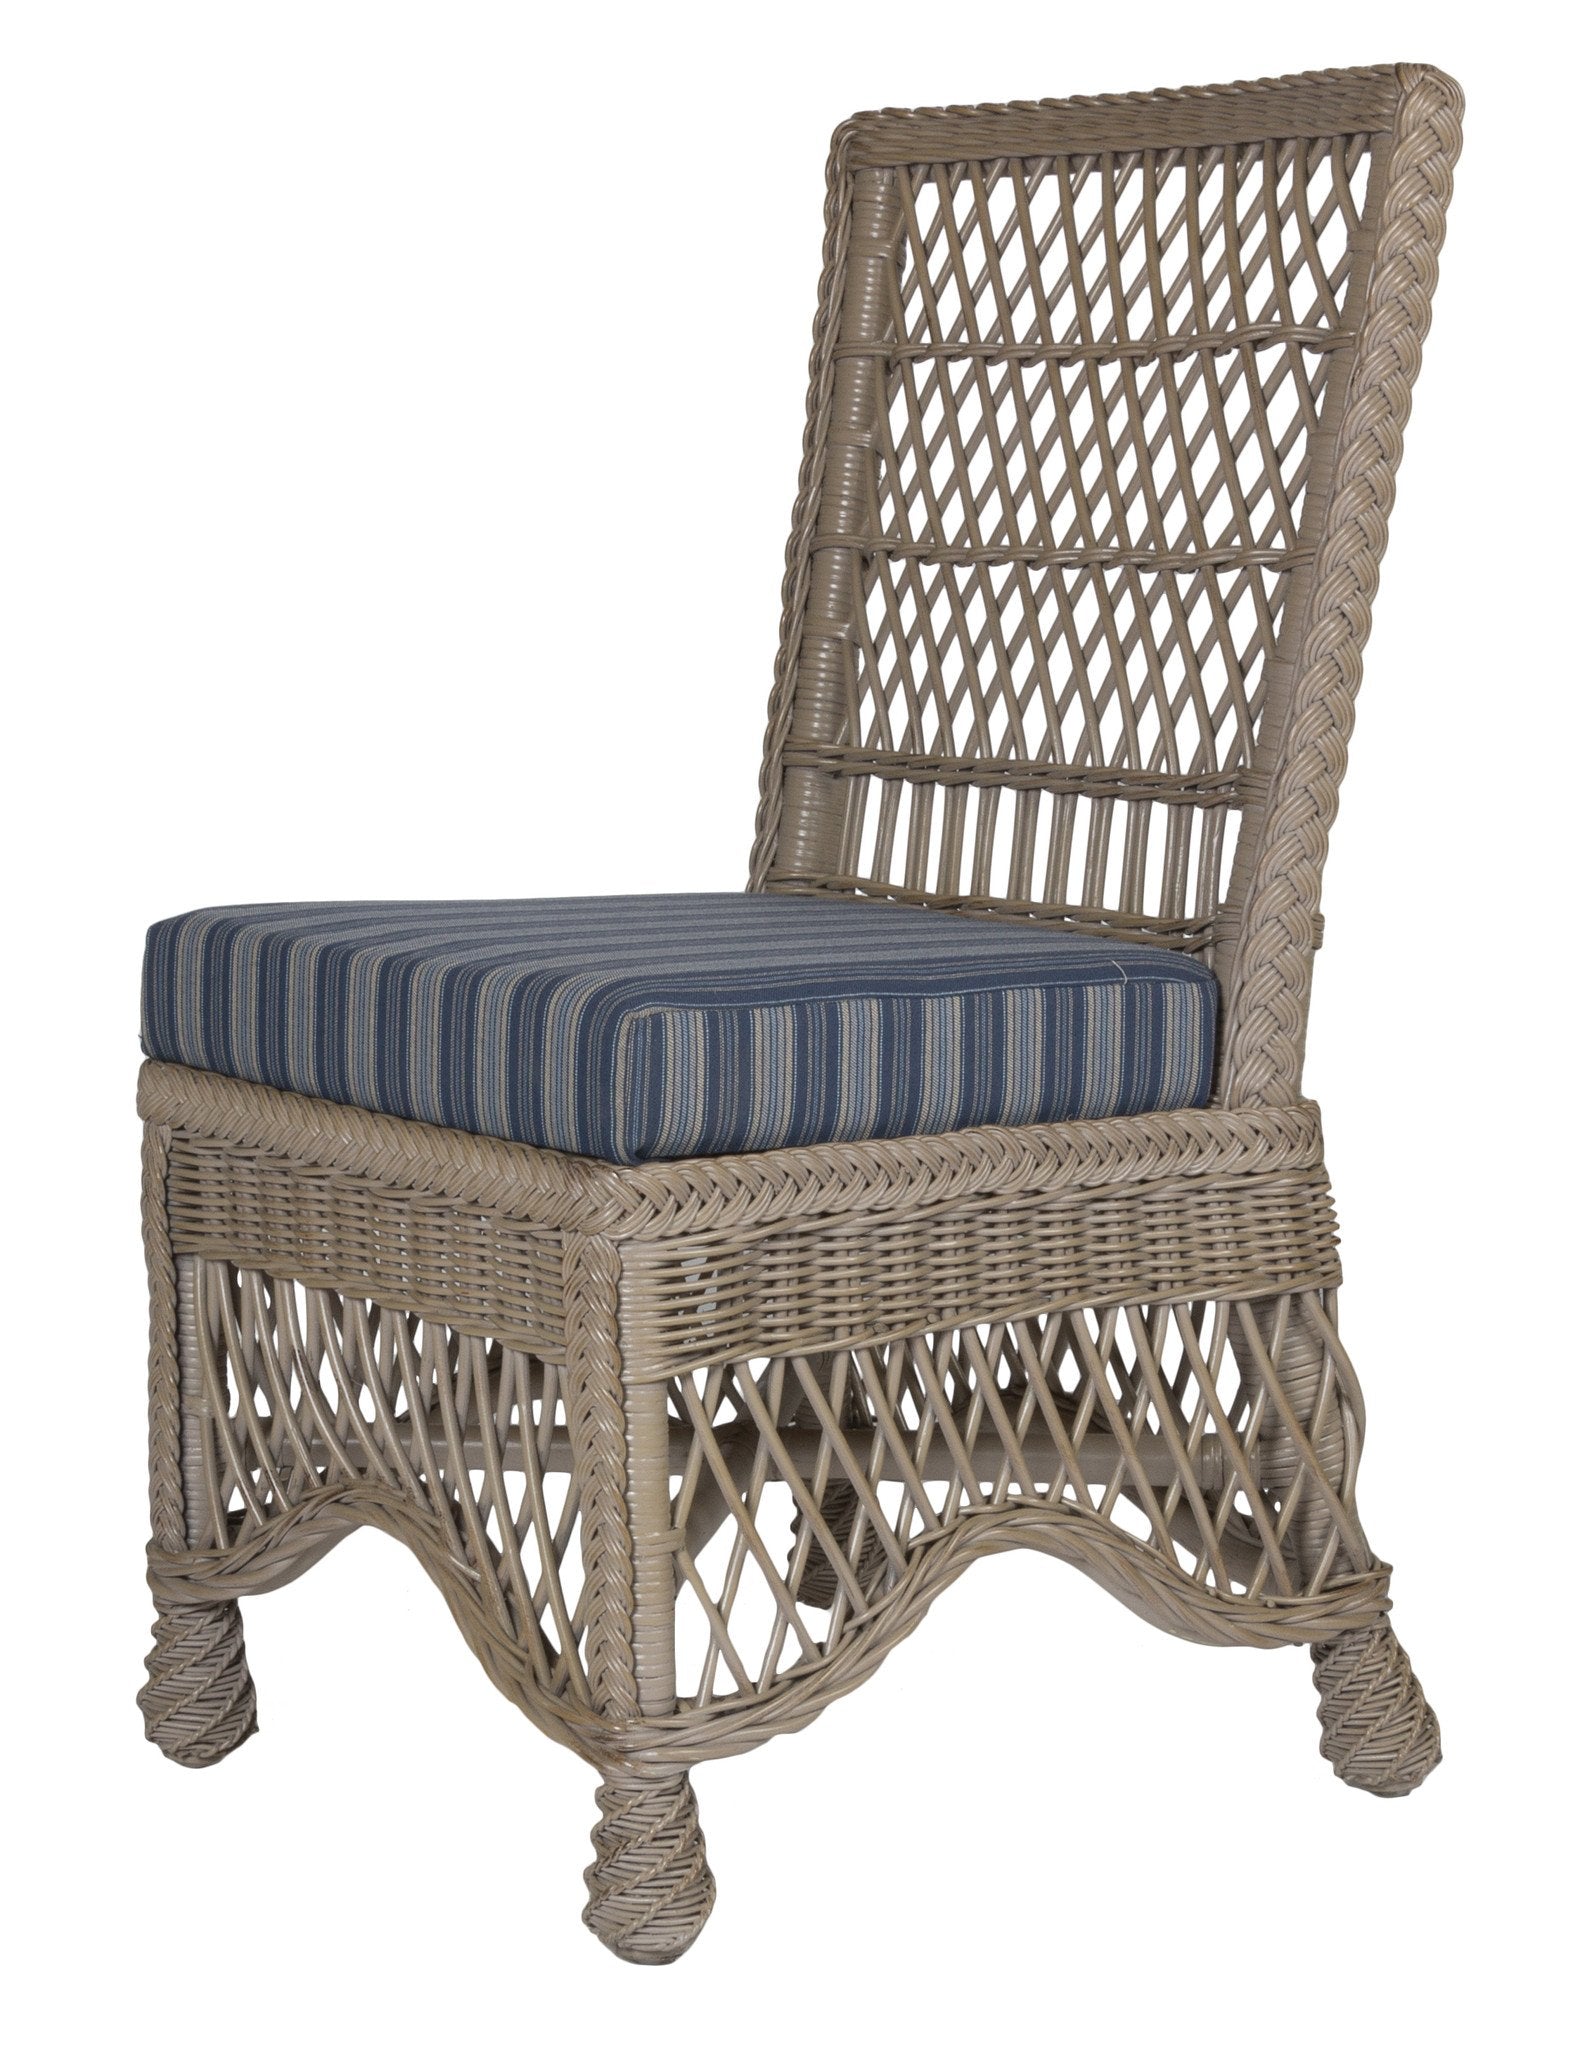 Designer Wicker & Rattan By Tribor Naples Dining Side Chair Dining Chair - Rattan Imports